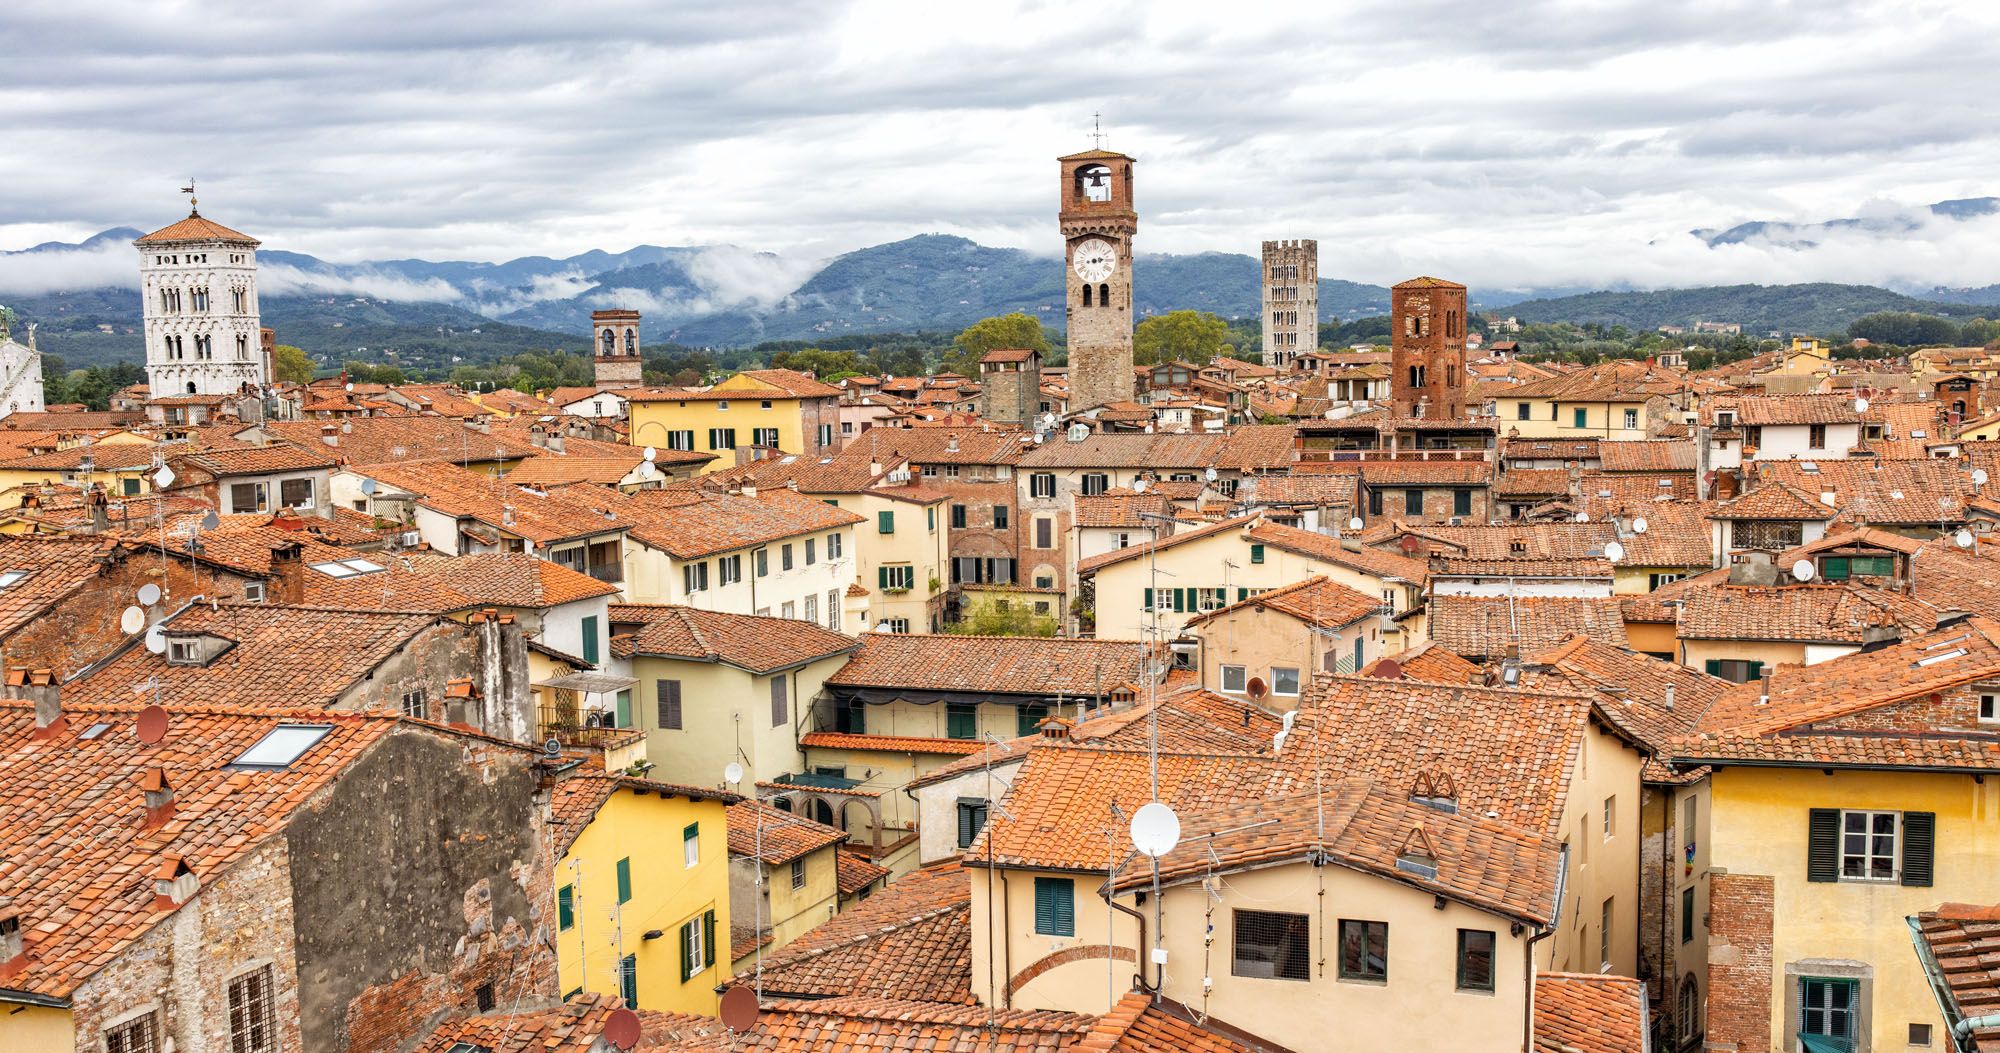 Featured image for “Lucca, Italy: Best Things to Do, Photos & Helpful Tips”